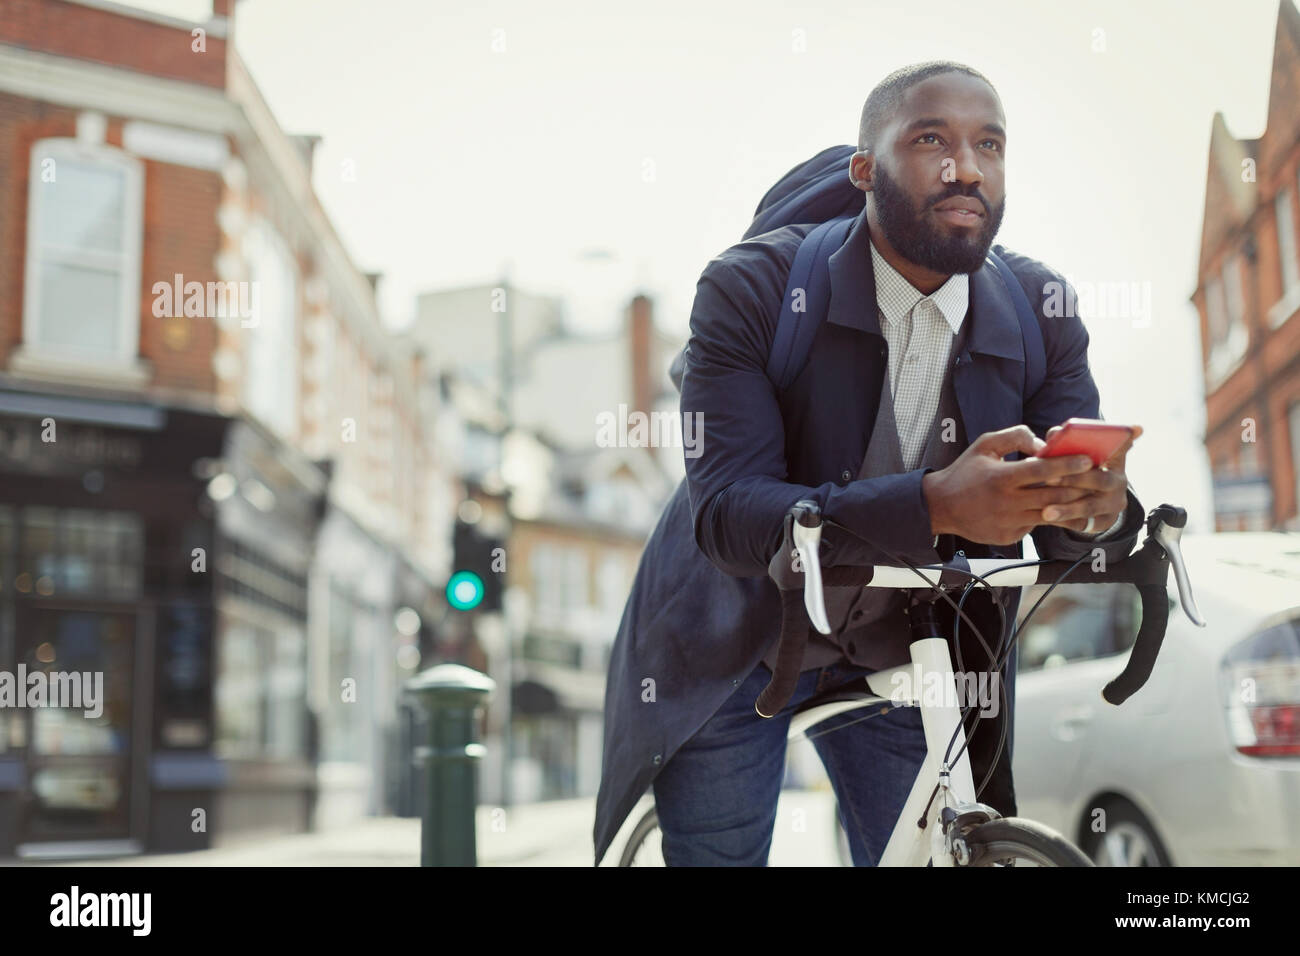 Pensive young businessman texting with cell phone, commuting with bicycle on urban street Stock Photo